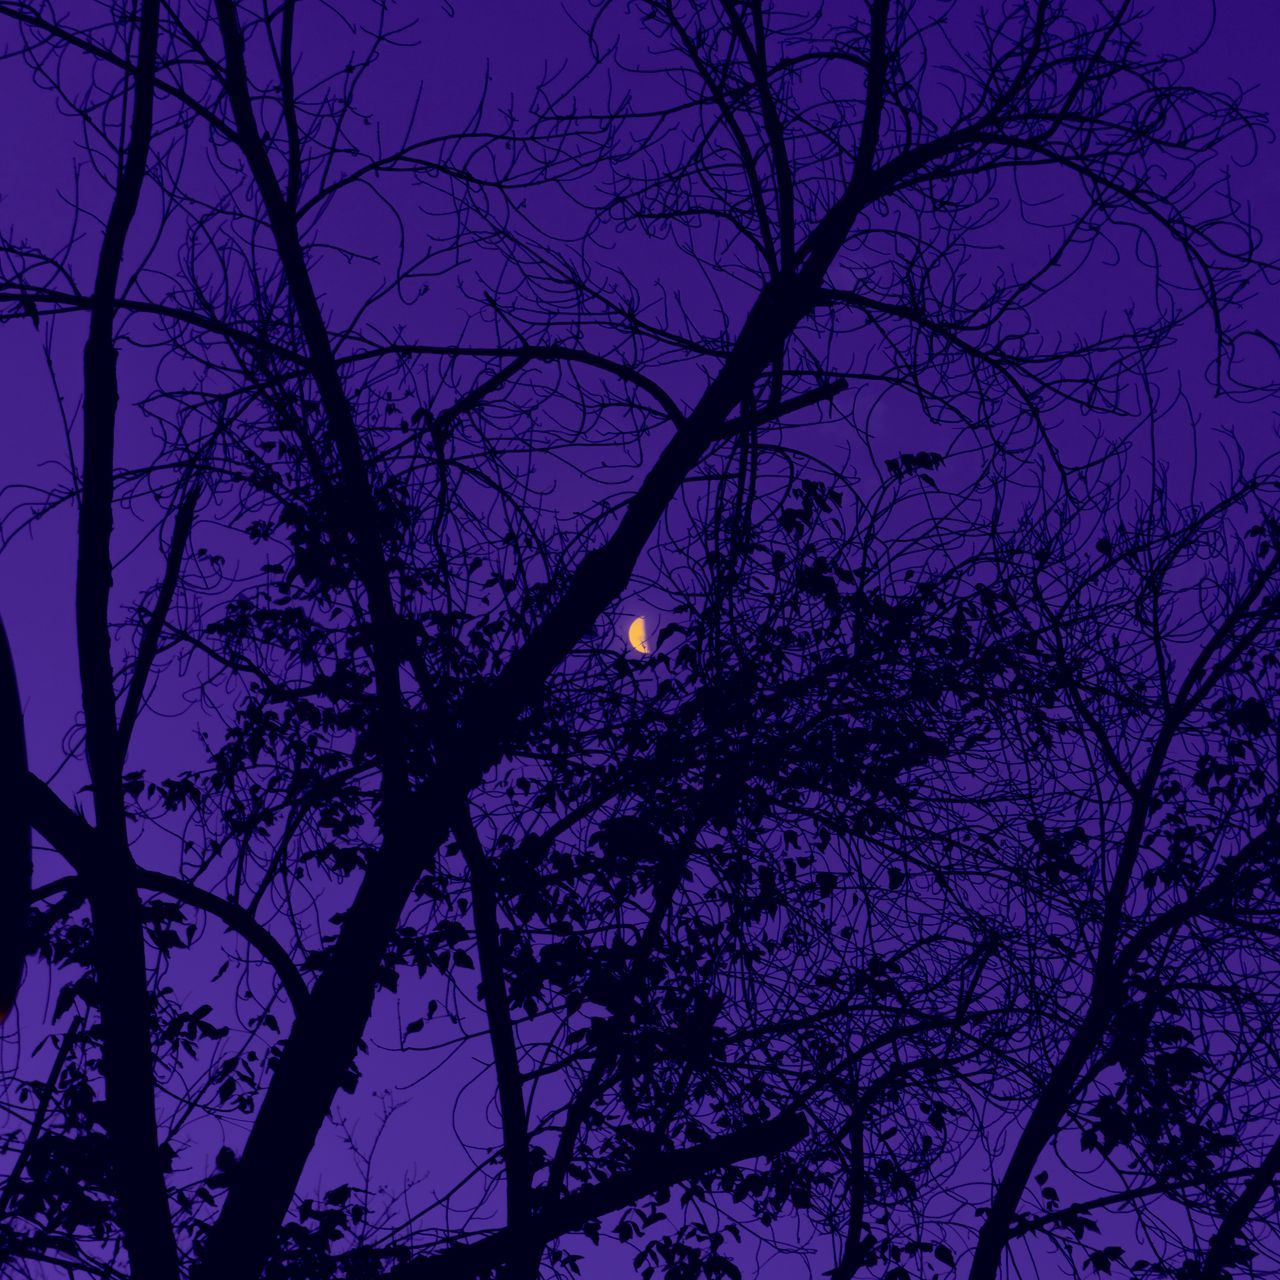 A moon is in the sky over some trees - IPad